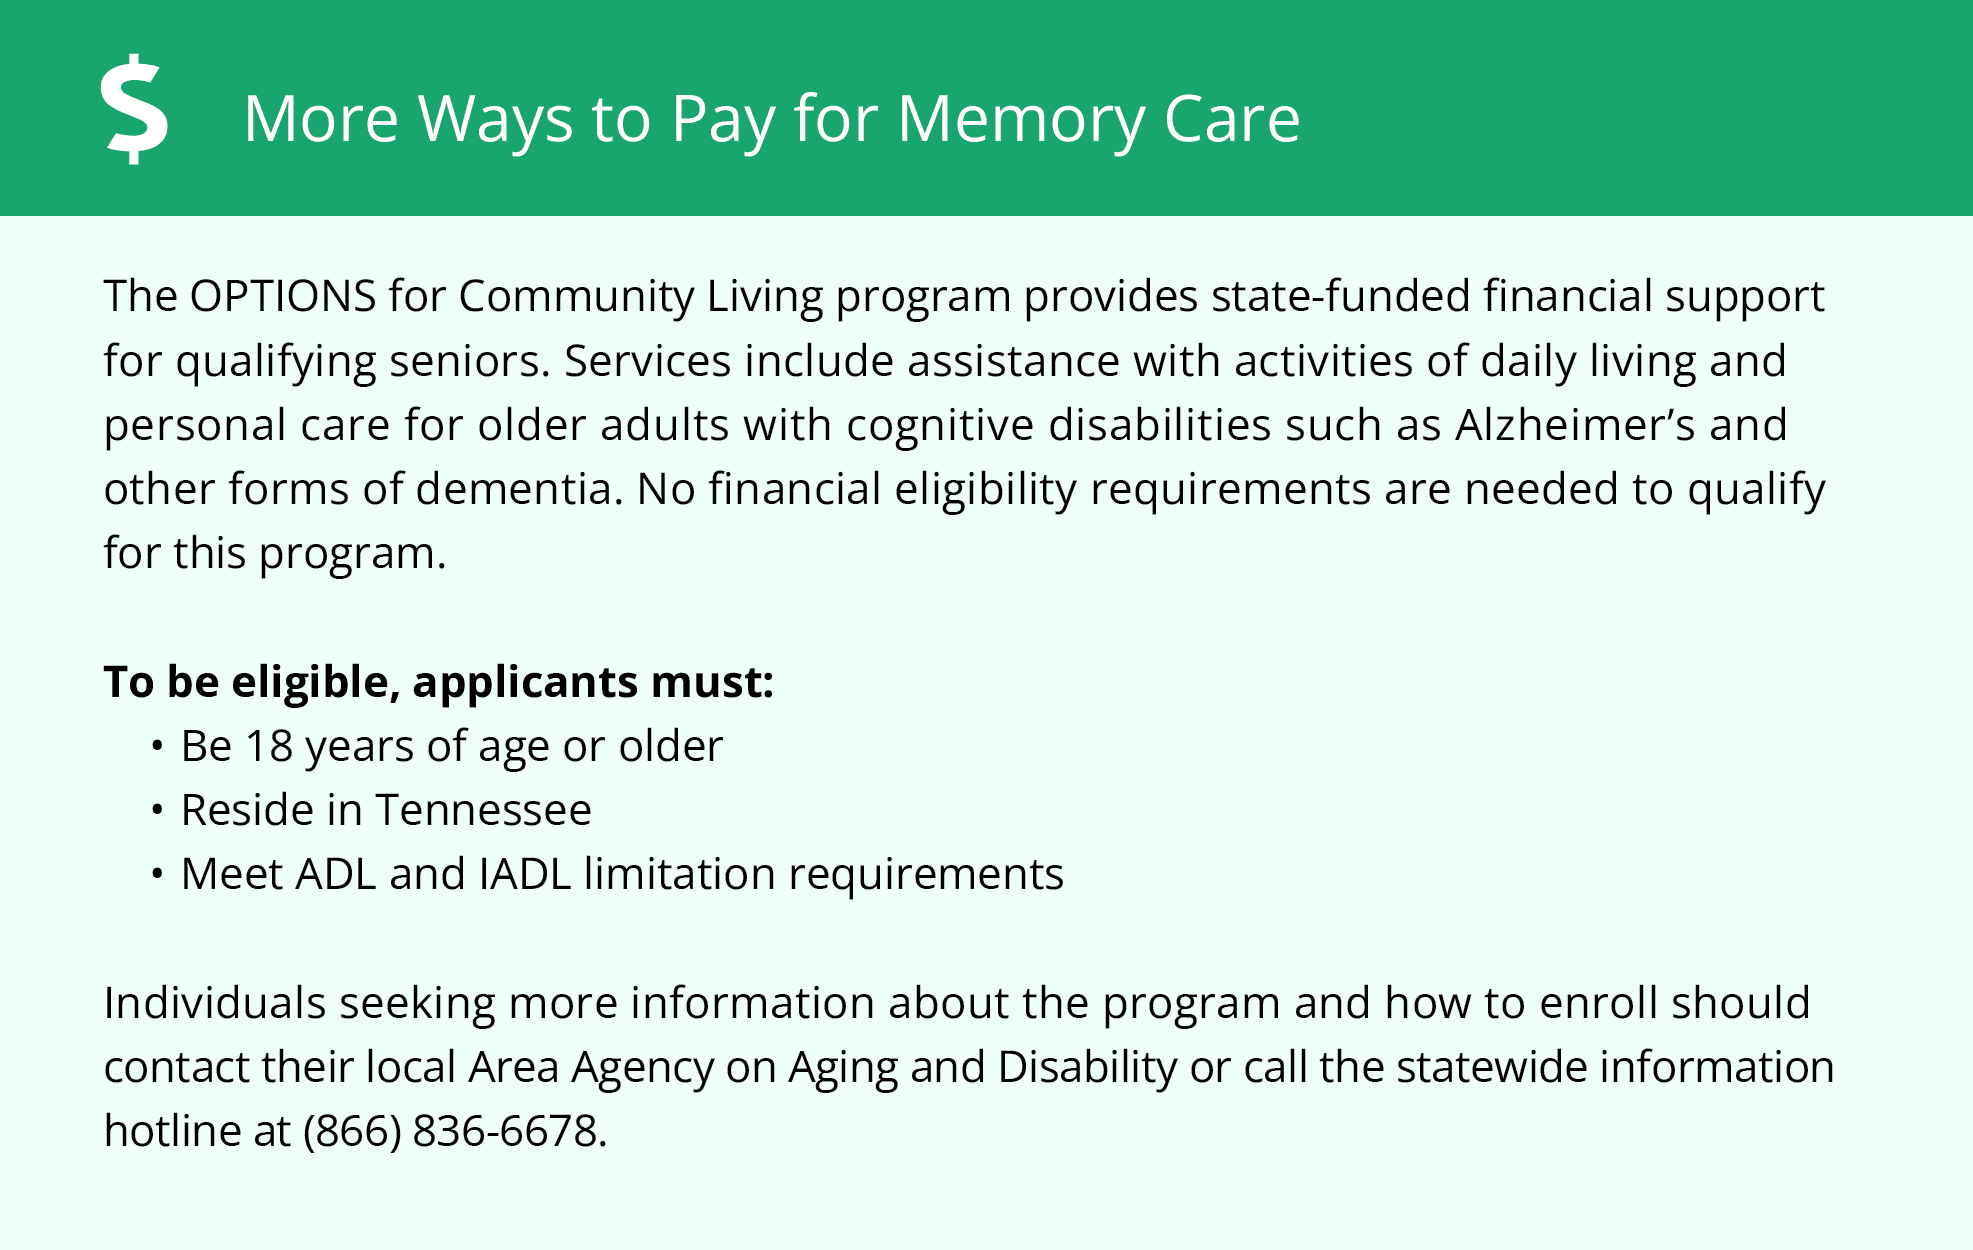 More ways to pay for memory care in TN